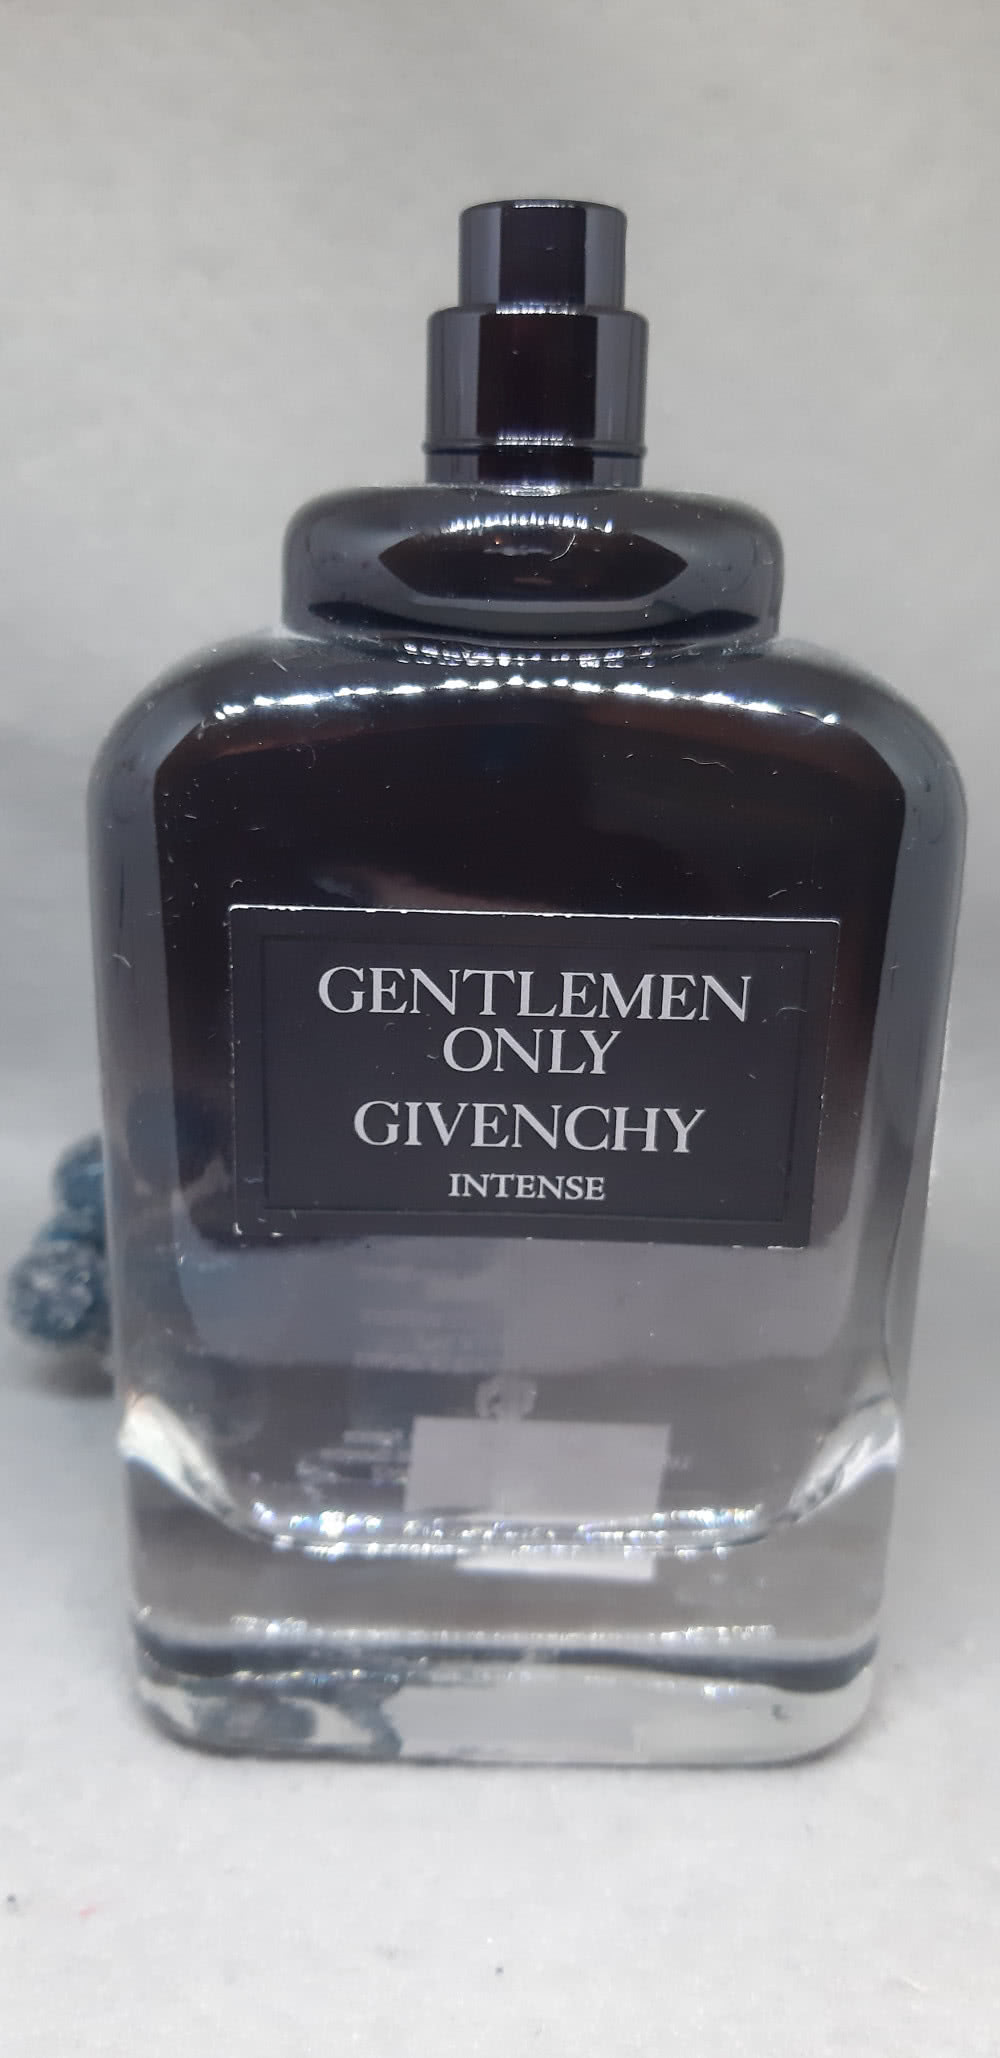 Givenchy only intense туалетная вода 100 мл